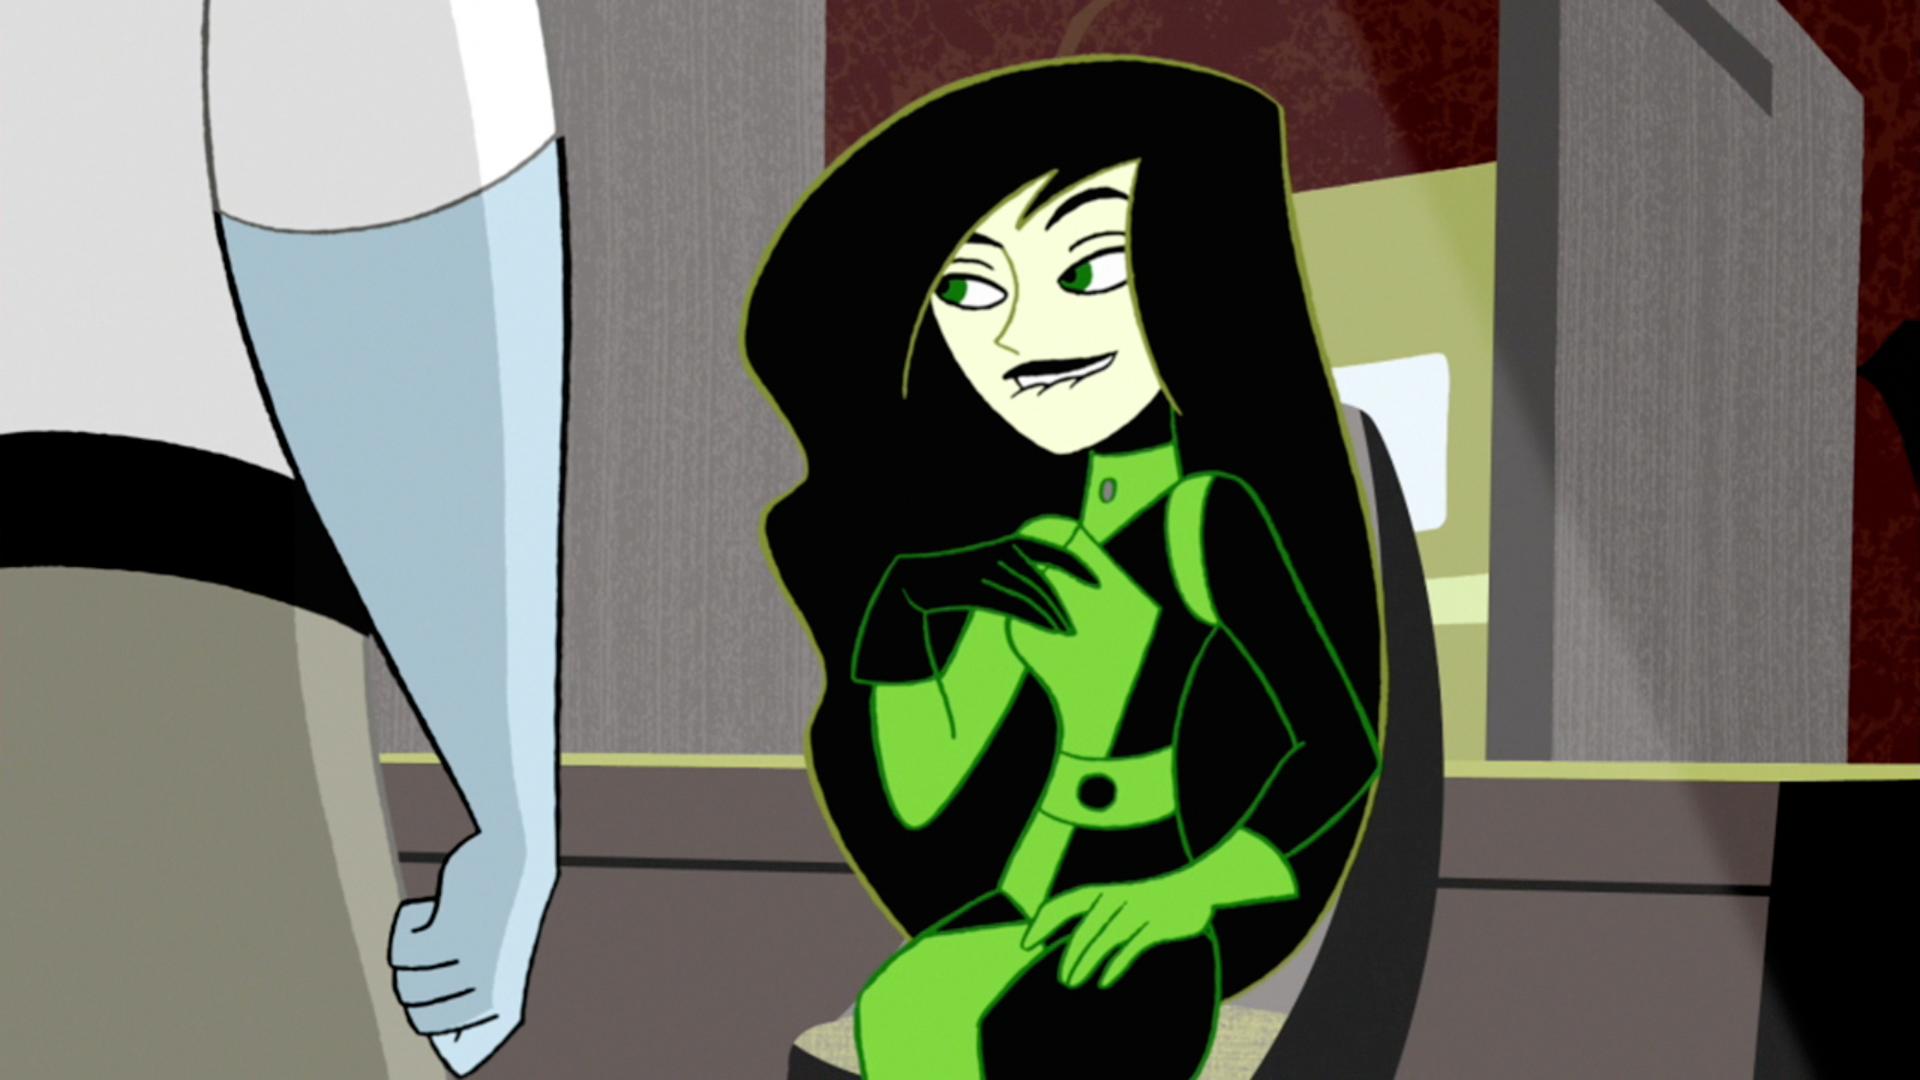 Best shego quotes